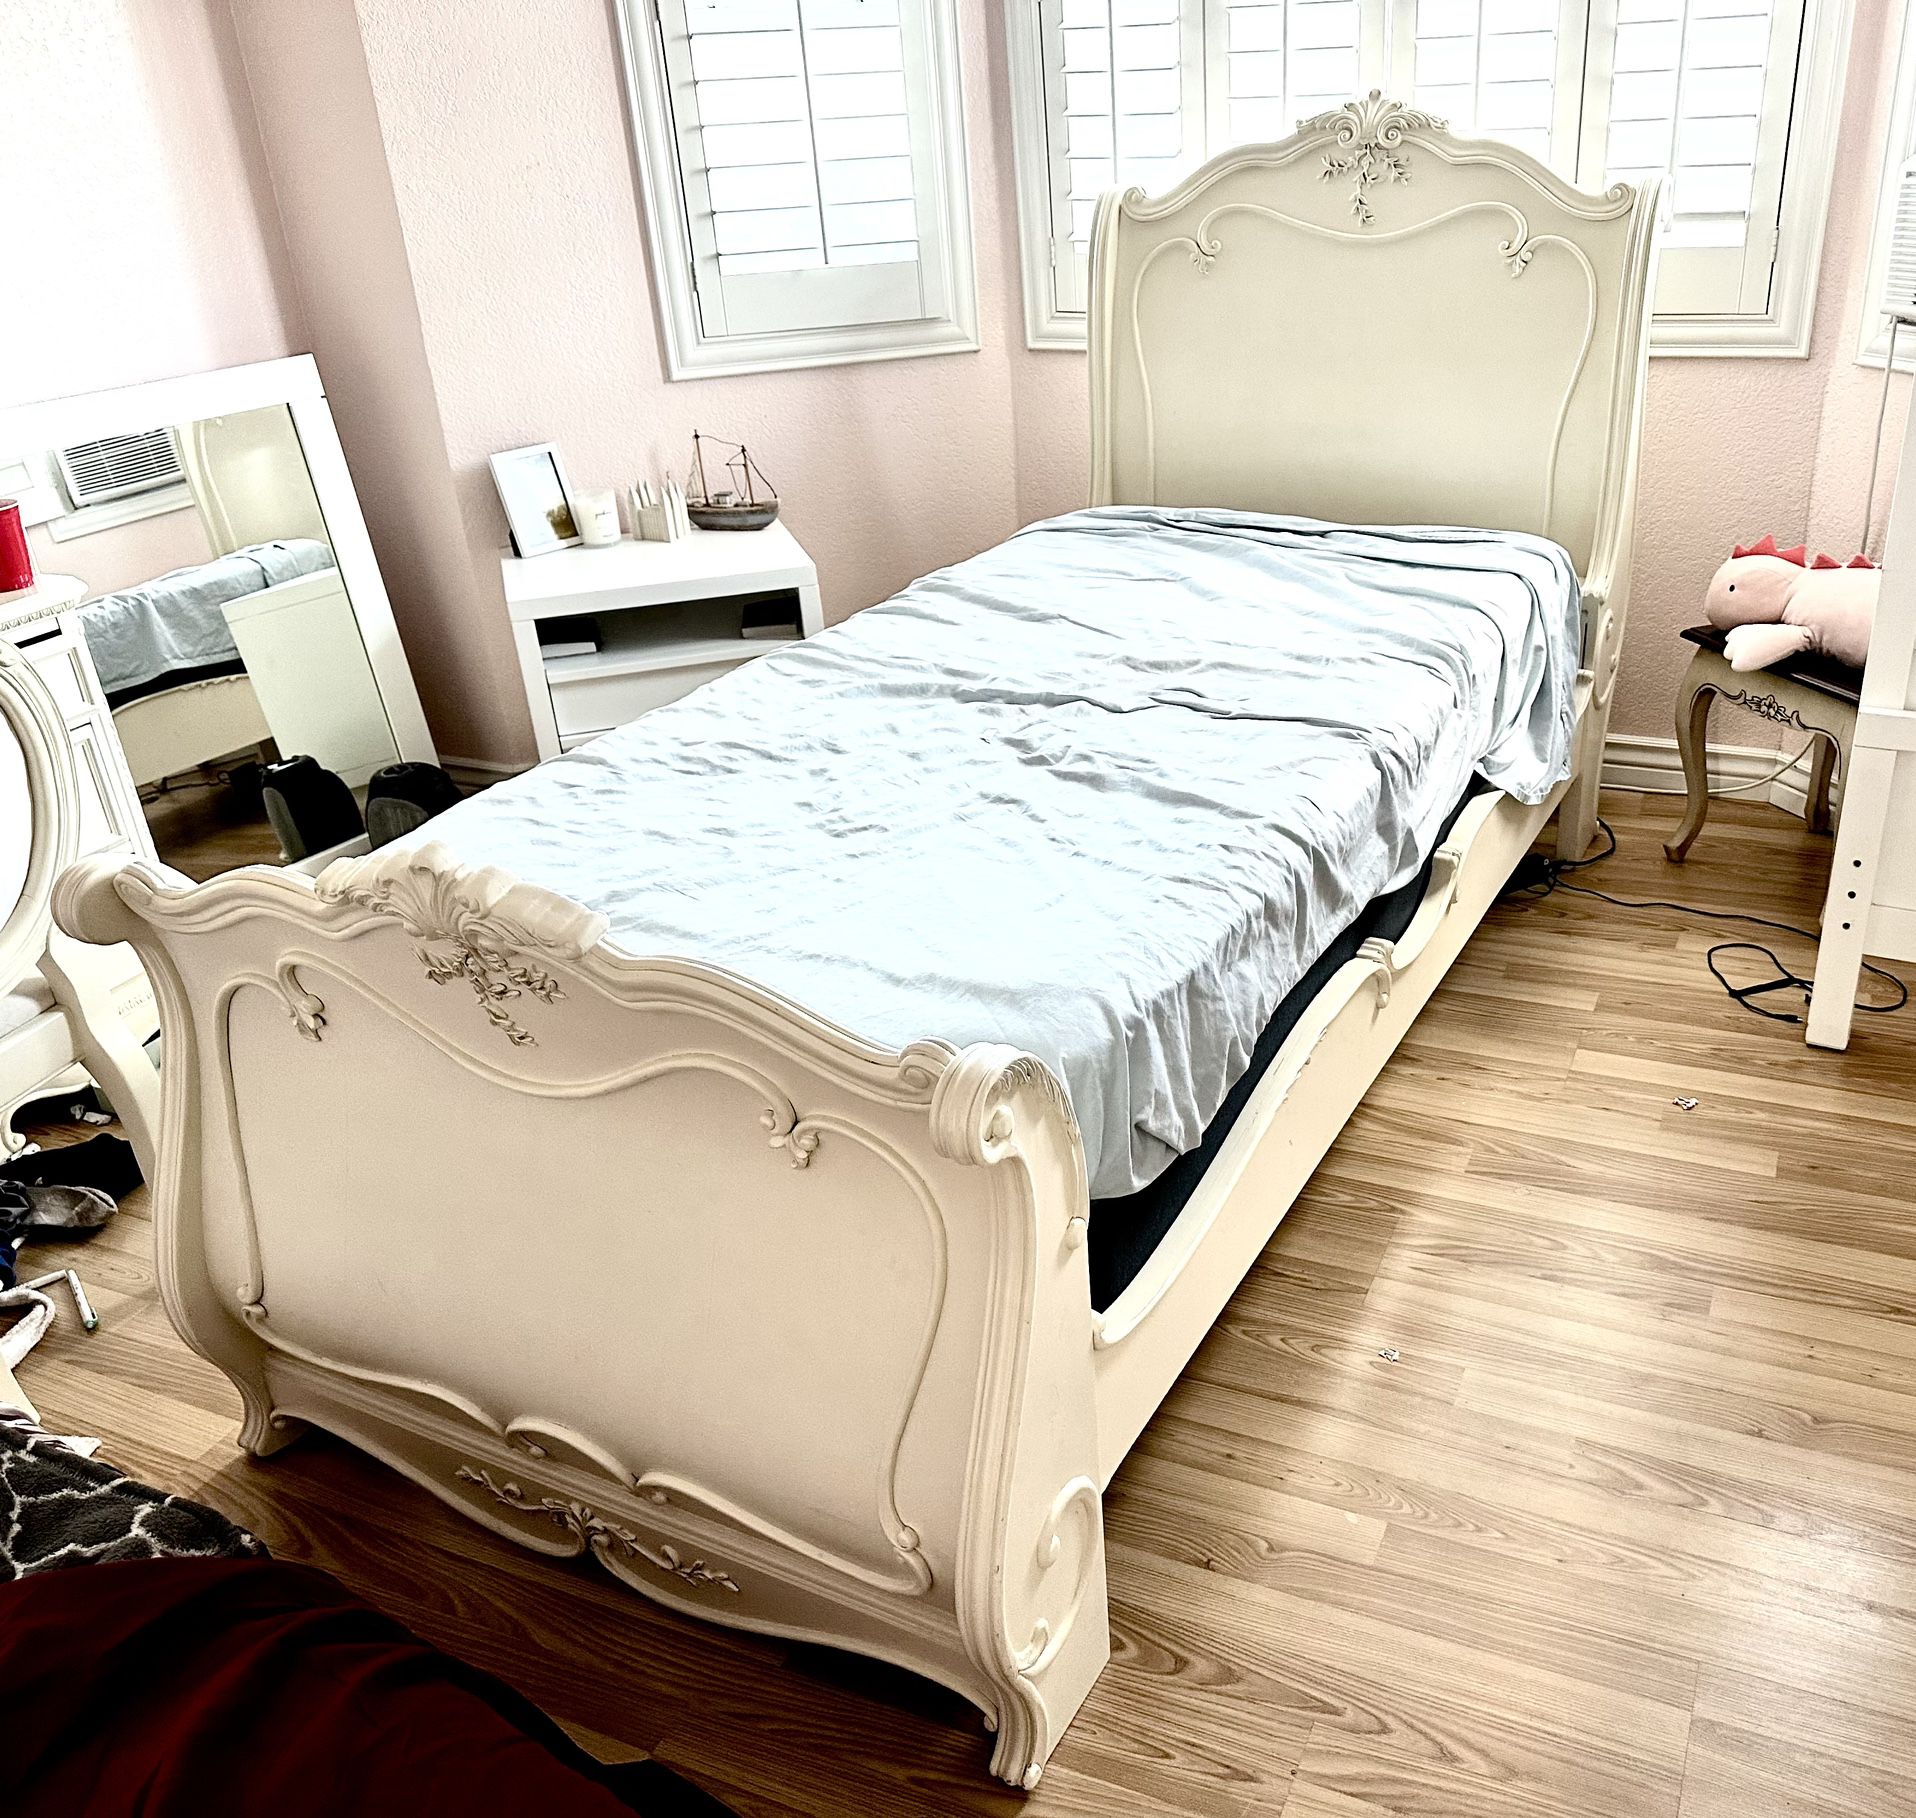 Beautiful Twin Wood Sleigh Bed Cream / Off White Color Includes Mattress & Box Spring 